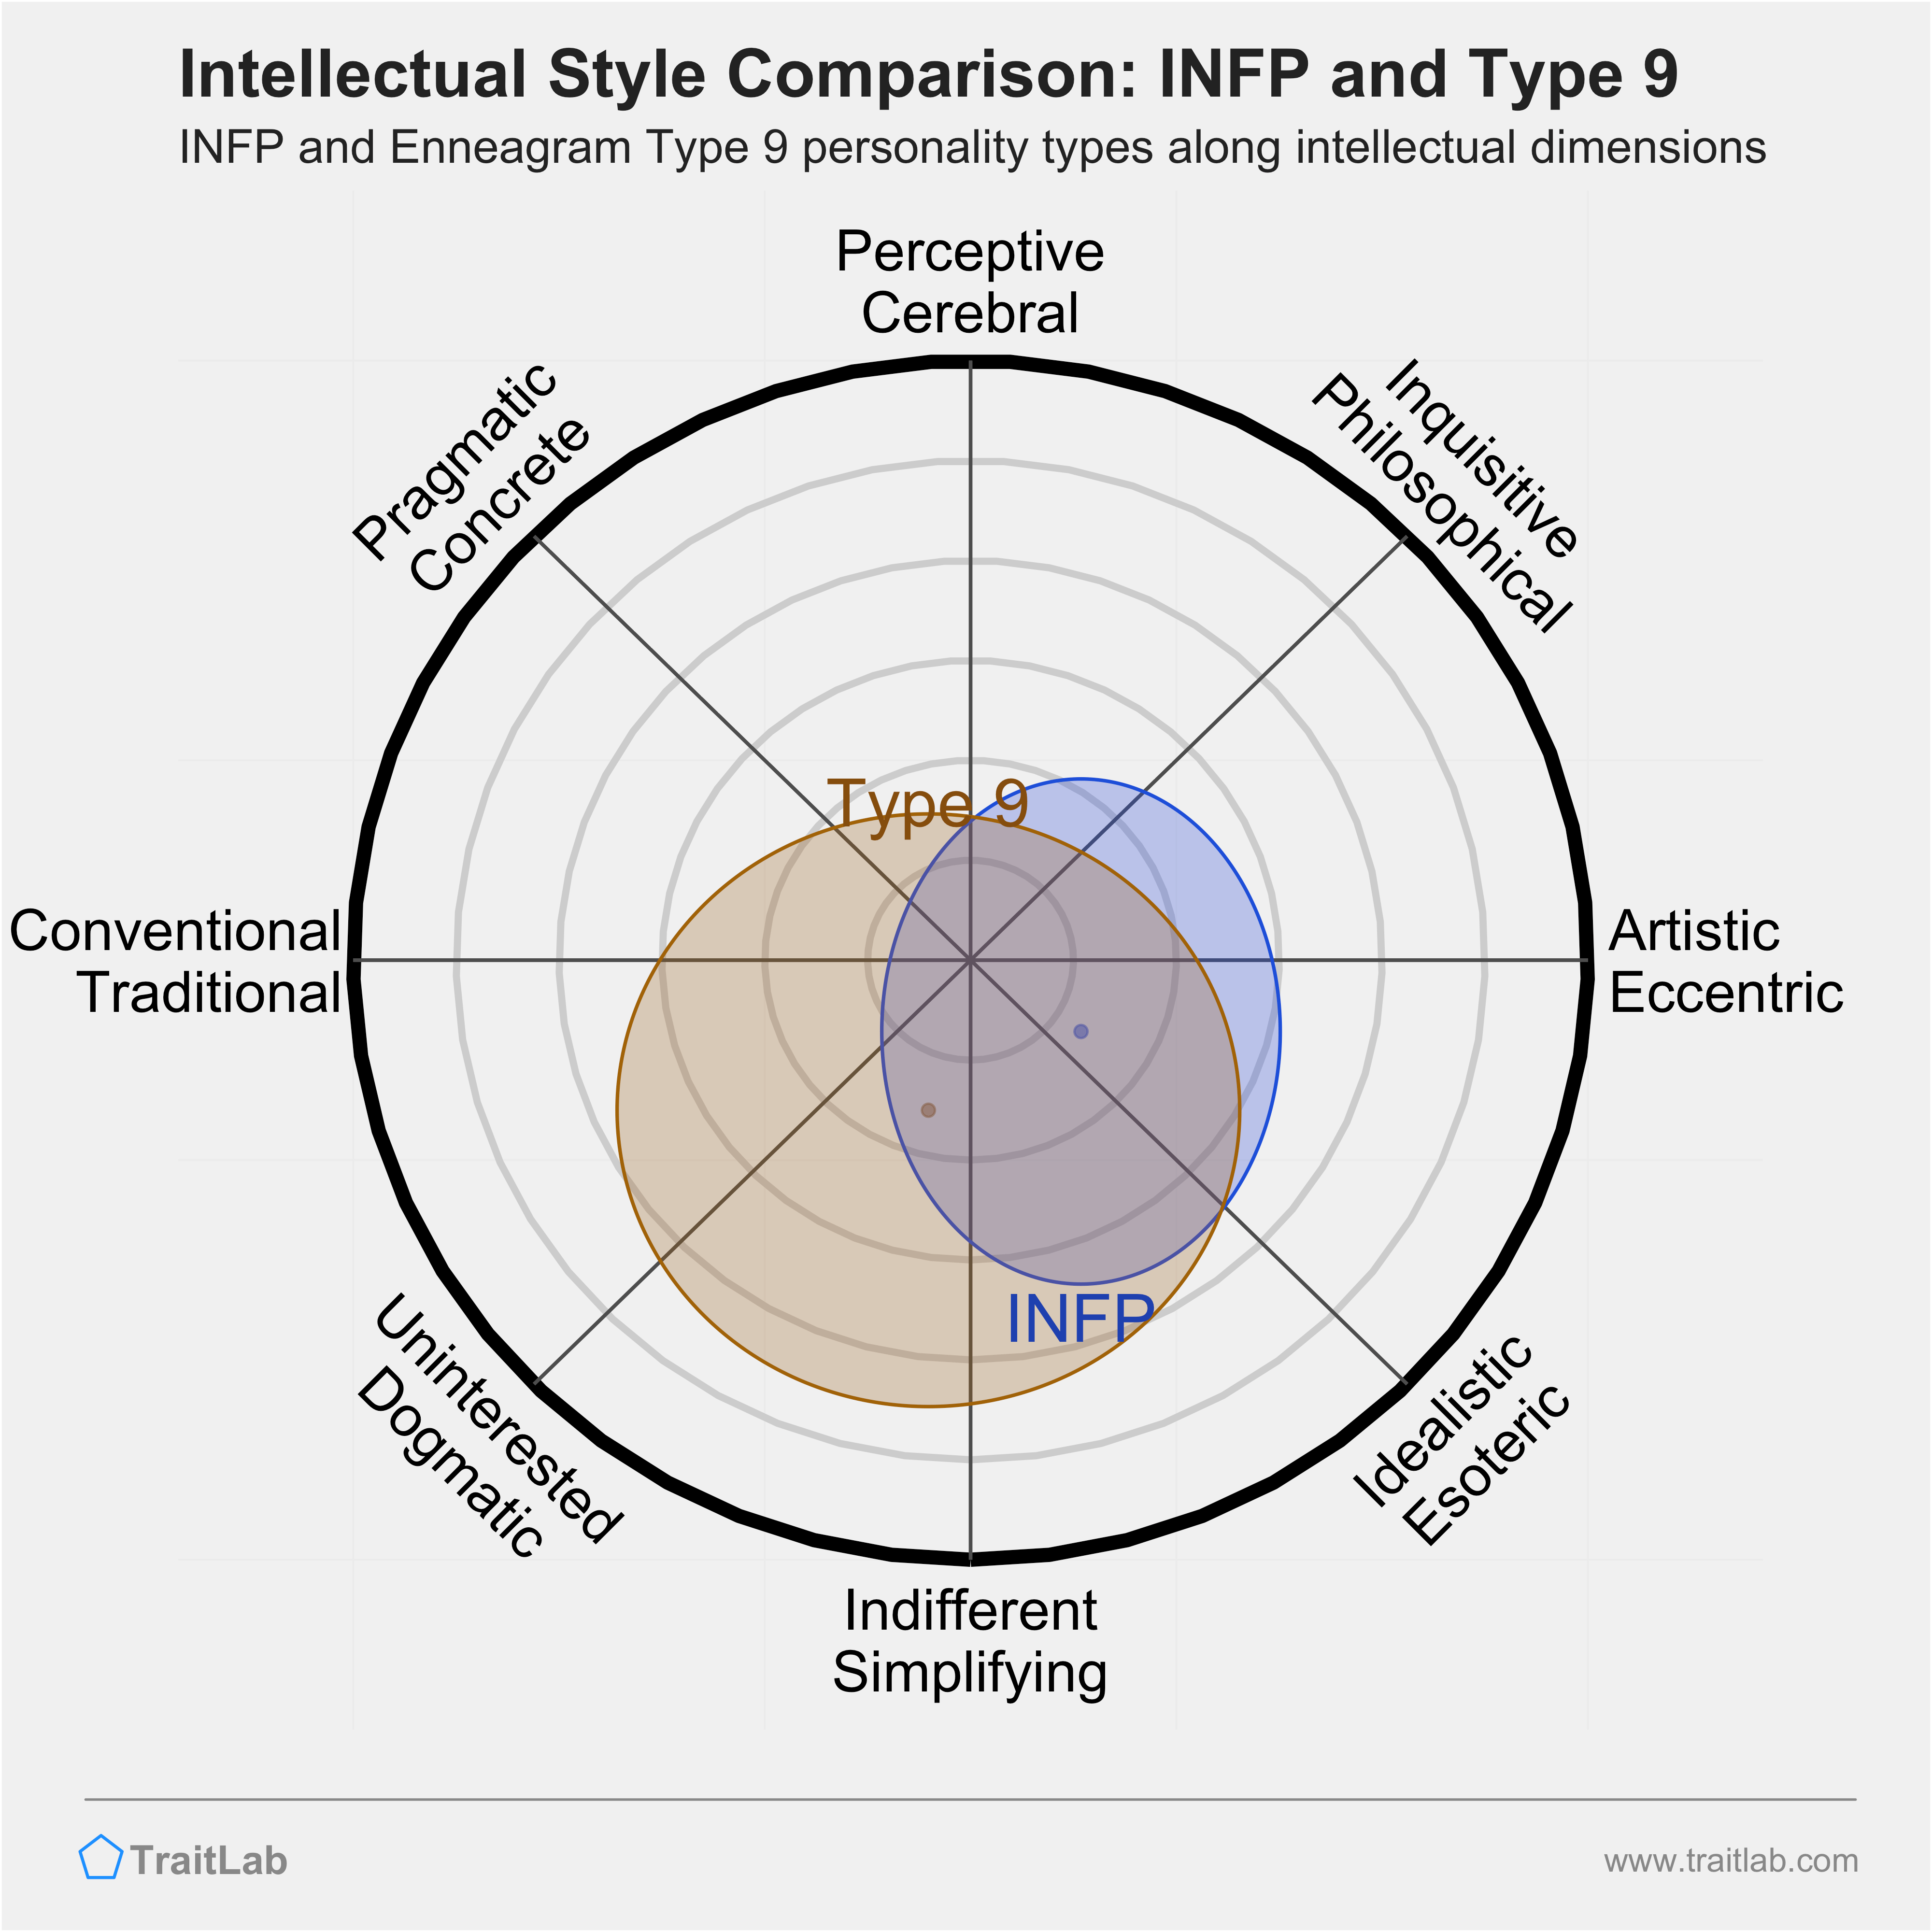 INFP and Type 9 comparison across intellectual dimensions